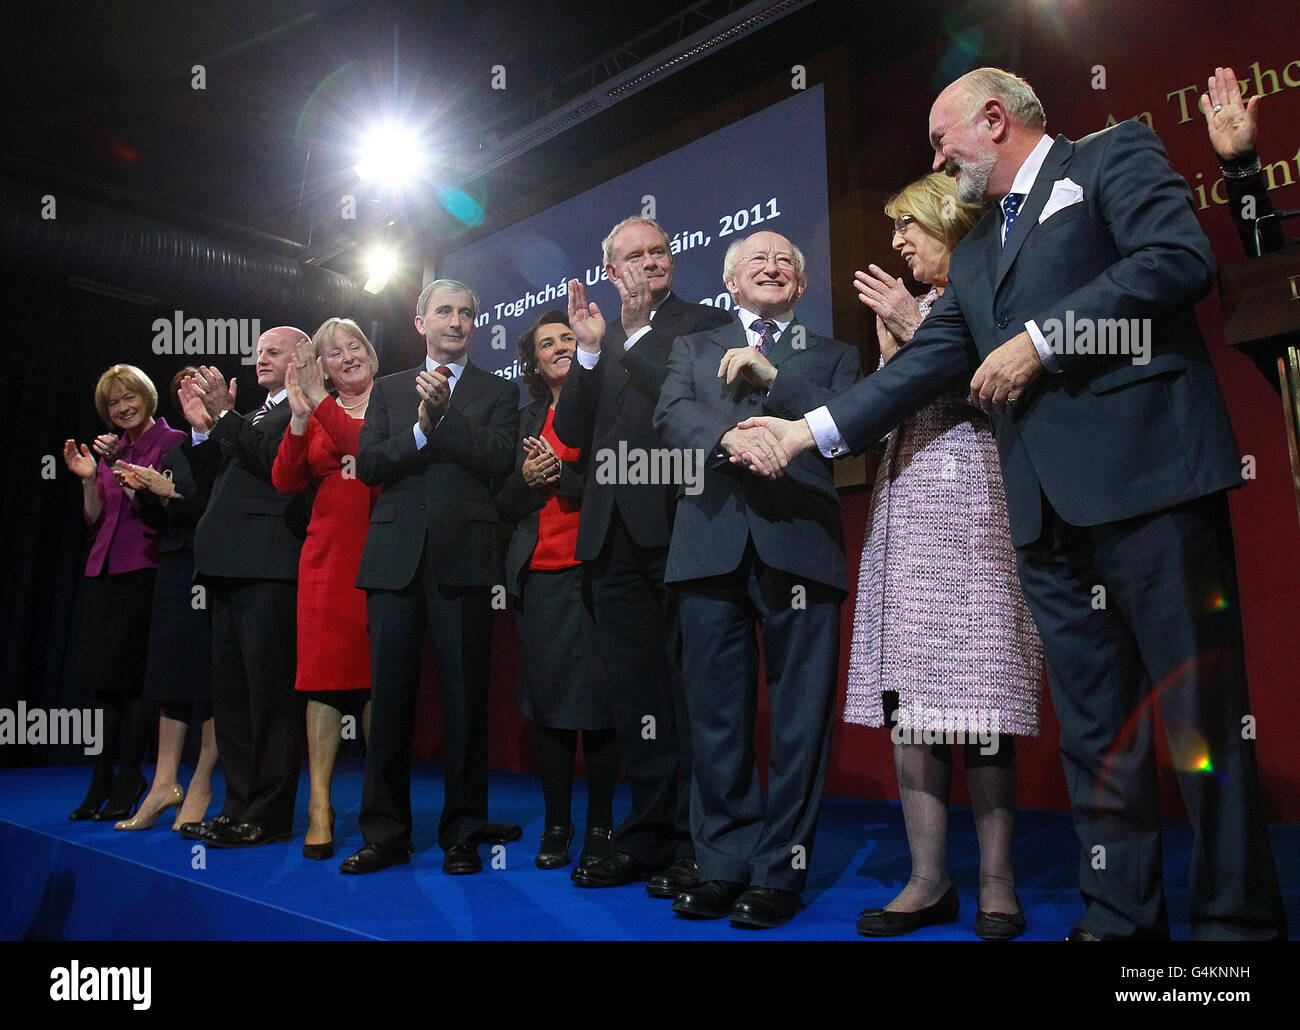 Presidential candidates Mary Davis (1st left), Sean Gallagher (3rd left), Gay Mitchell (5th left), Martin McGuinness (7th left), Michael D Higgins (8th left) shaking hands with David Norris (10th left) at the announcement of the first preference votes in the Irish Presidential Election at the count centre in Dublin castle. Higgins will be Ireland's ninth president. Stock Photo